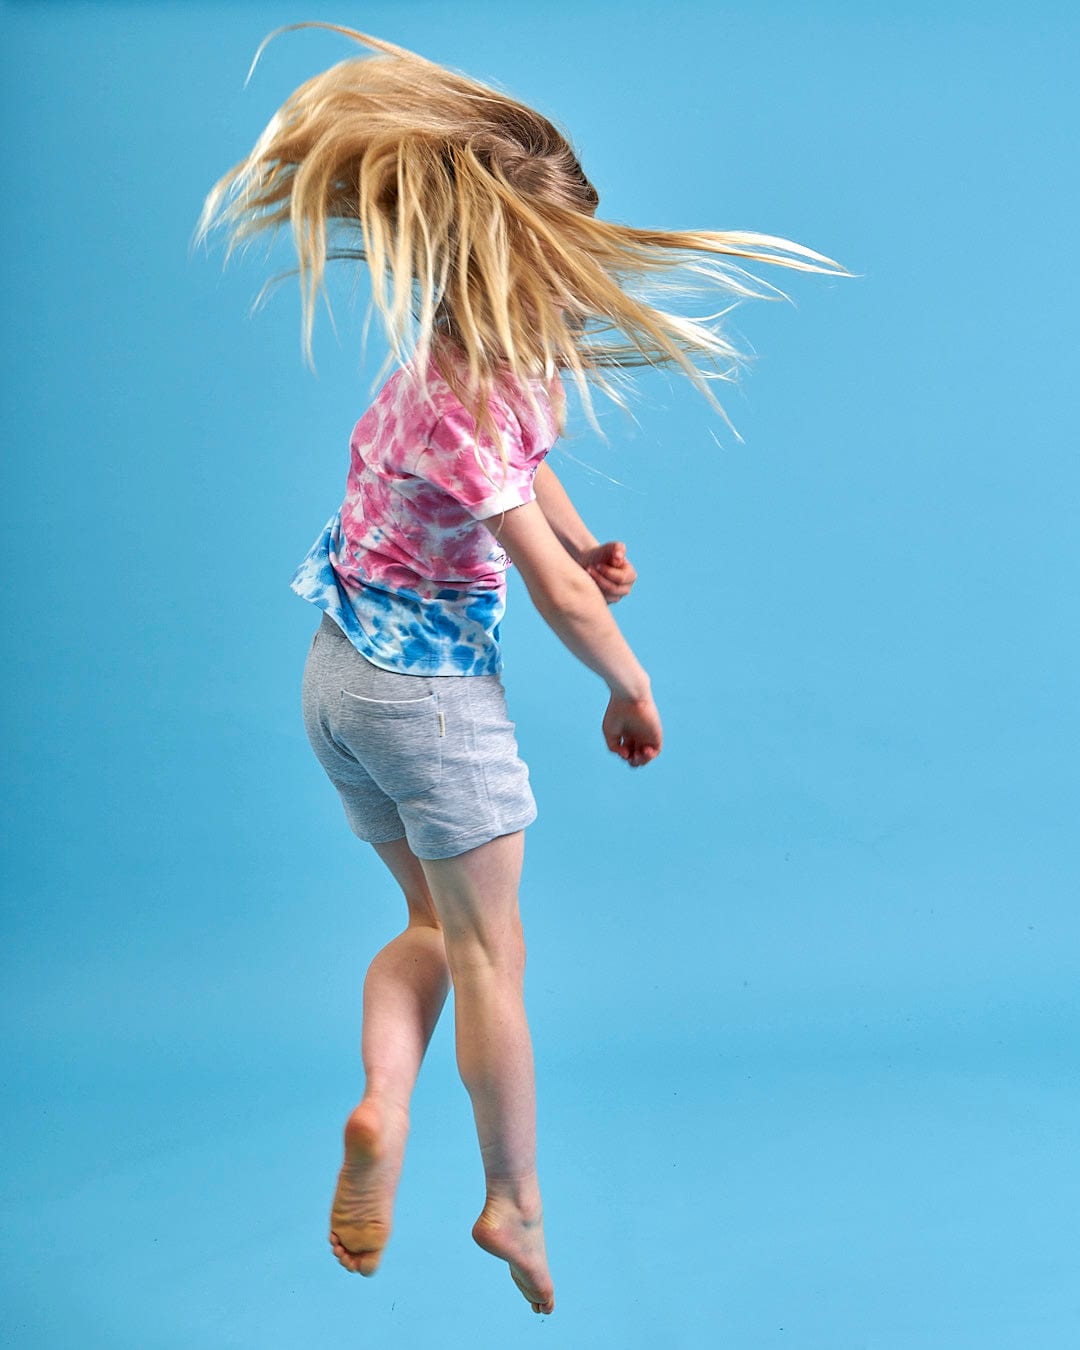 A beach ready young girl jumping in the air with her hair blowing in the wind, wearing a Saltrock Mermaid Surf - Kids Tie Dye Short Sleeve T-Shirt - Blue/Pink.